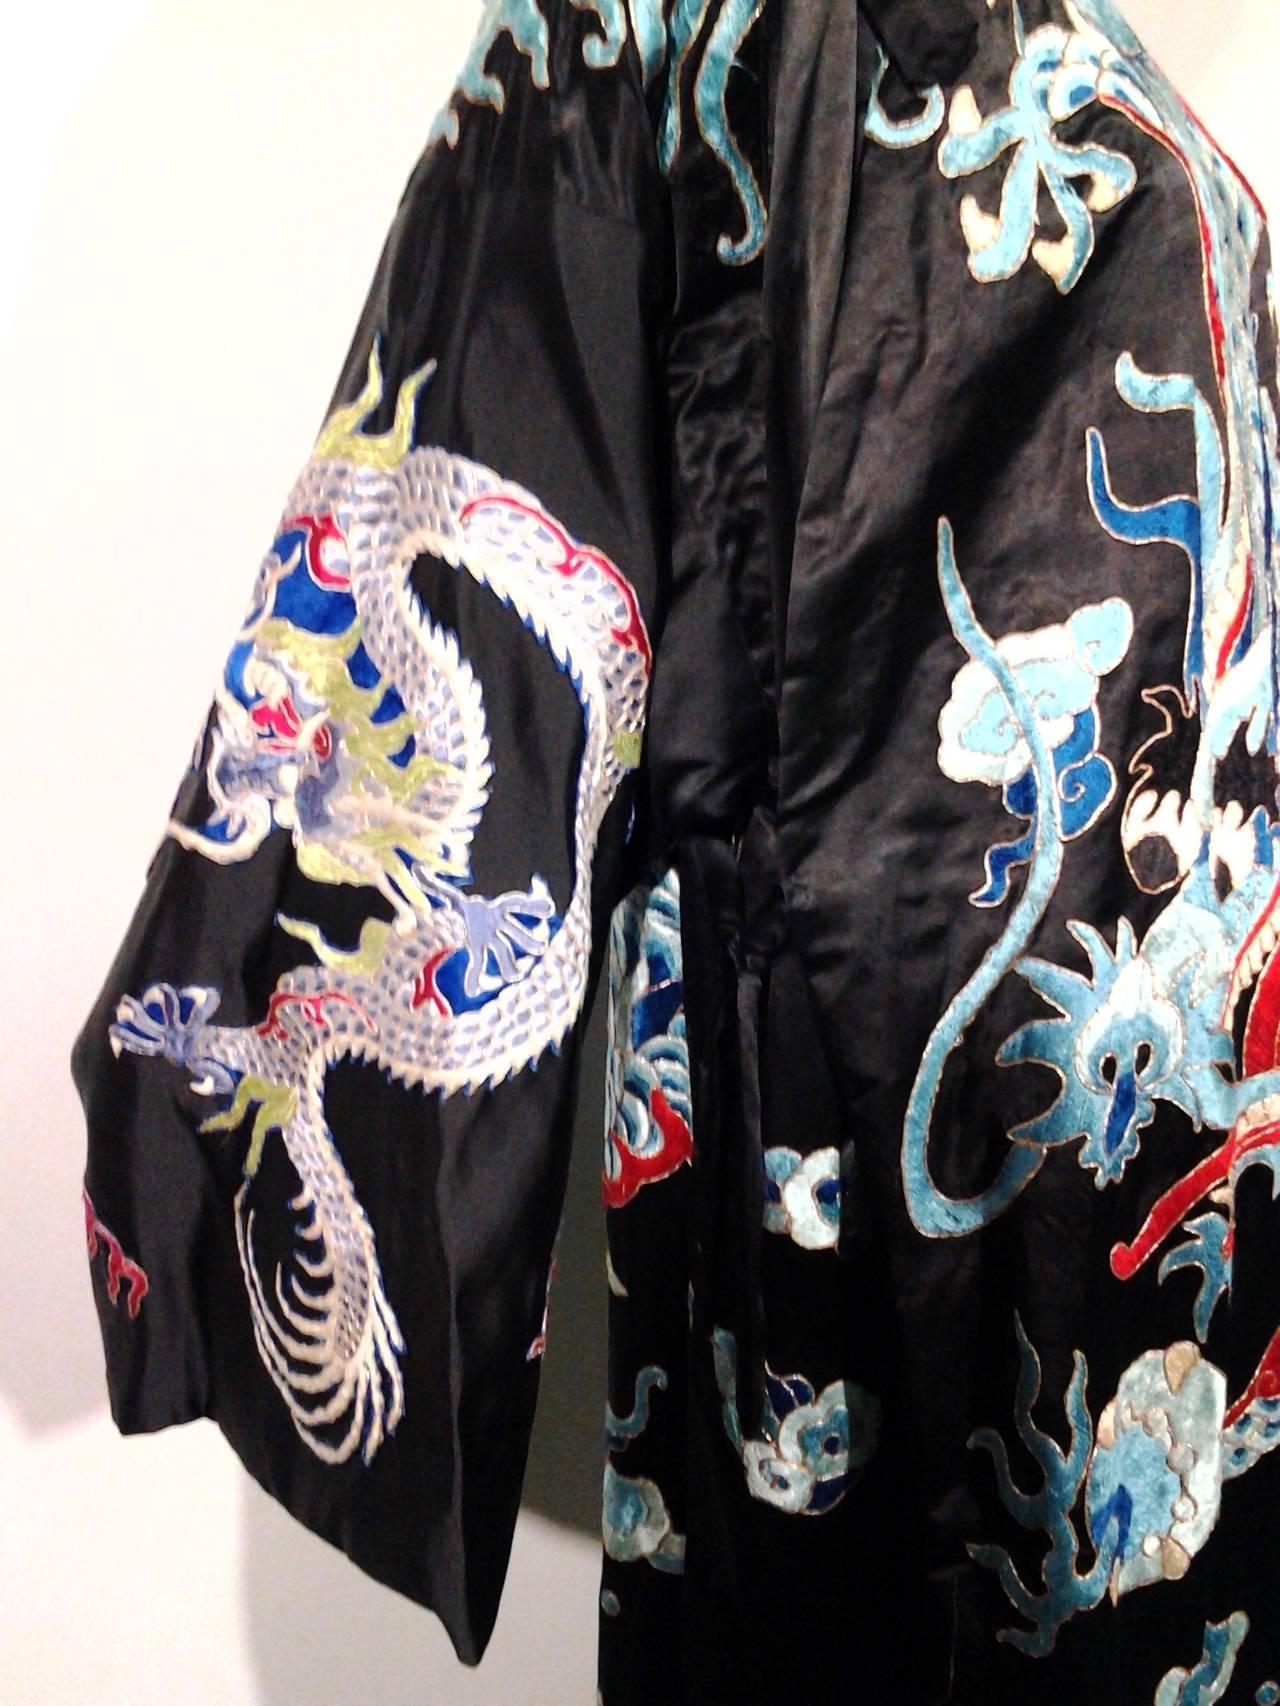 Heavily Embroidered Chinese Opera Coat or Robe w/ Dragon Motif 1